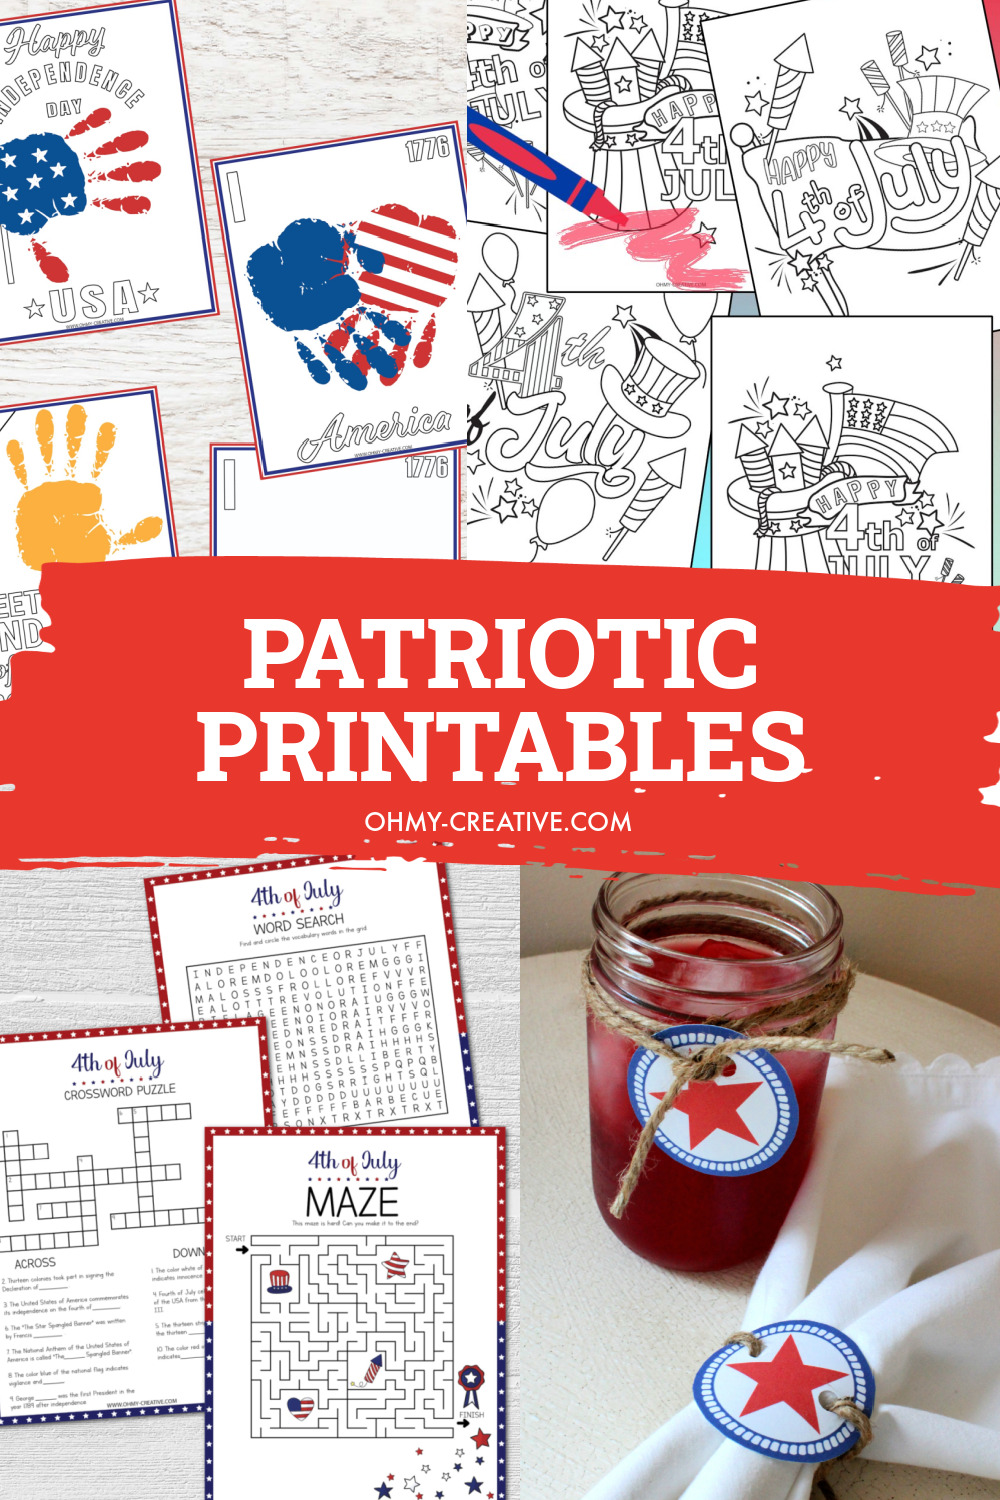 Find great ways to keep the kids busy and celebrate this great country with these patriotic and 4th of July printables!